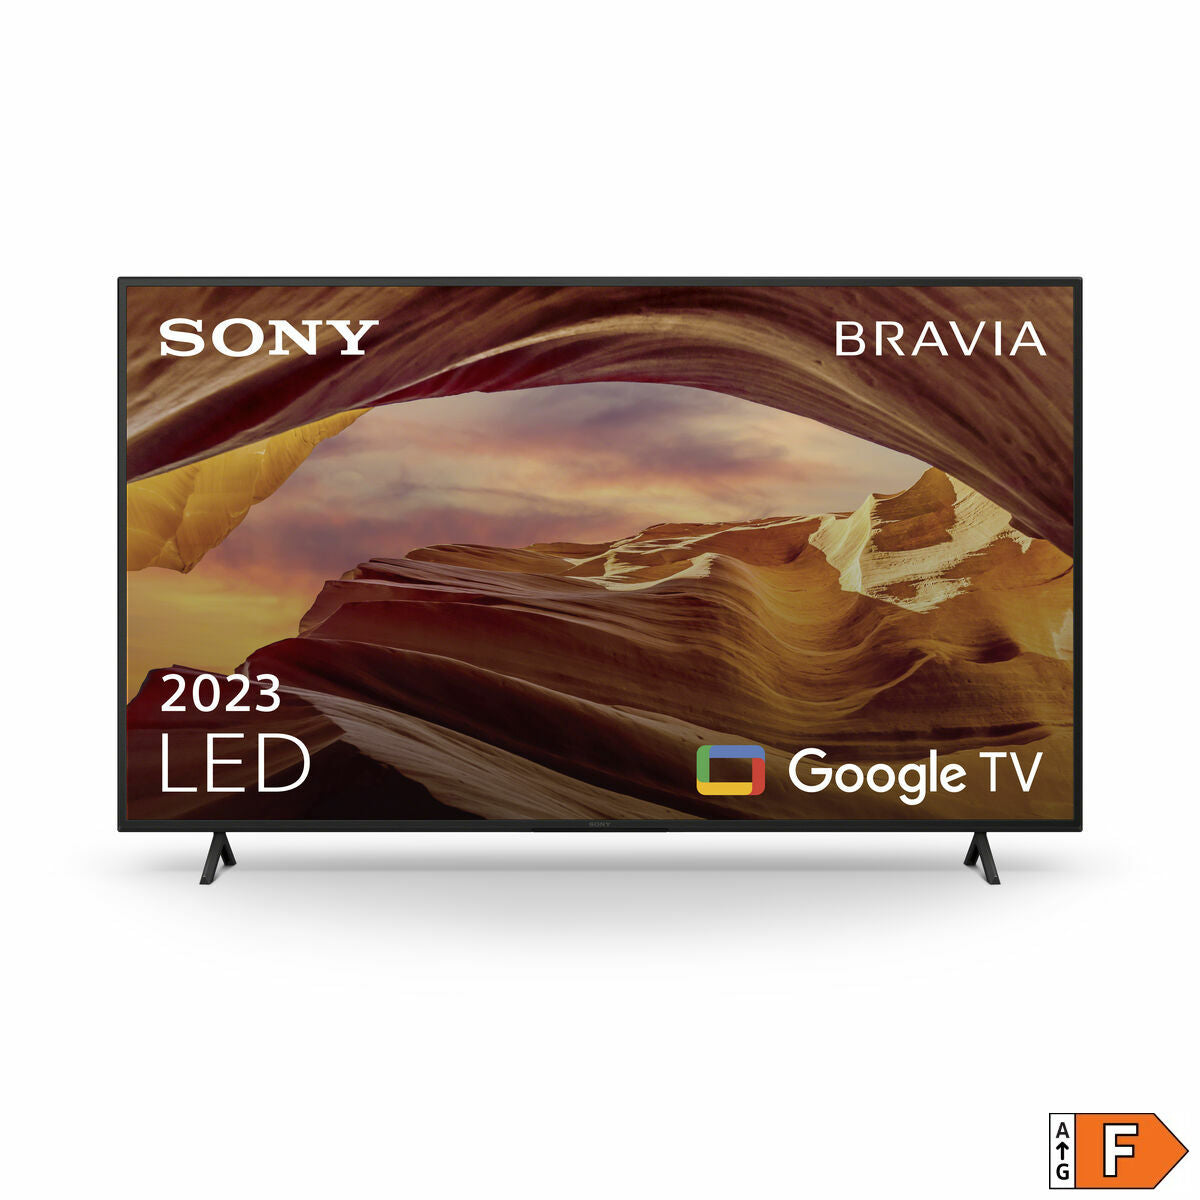 Television Sony KD65X75WLAEP 65" LED 4K Ultra HD HDR, Sony, Electronics, TV, Video and home cinema, television-sony-kd65x75wlaep-65-led-4k-ultra-hd-hdr, : 65 INCHES 165 CM, :65 INCHES or 165.1 CM, :Ultra HD, Brand_Sony, category-reference-2609, category-reference-2625, category-reference-2931, category-reference-t-18805, category-reference-t-19653, cinema and television, Condition_NEW, entertainment, Price_+ 1000, RiotNook